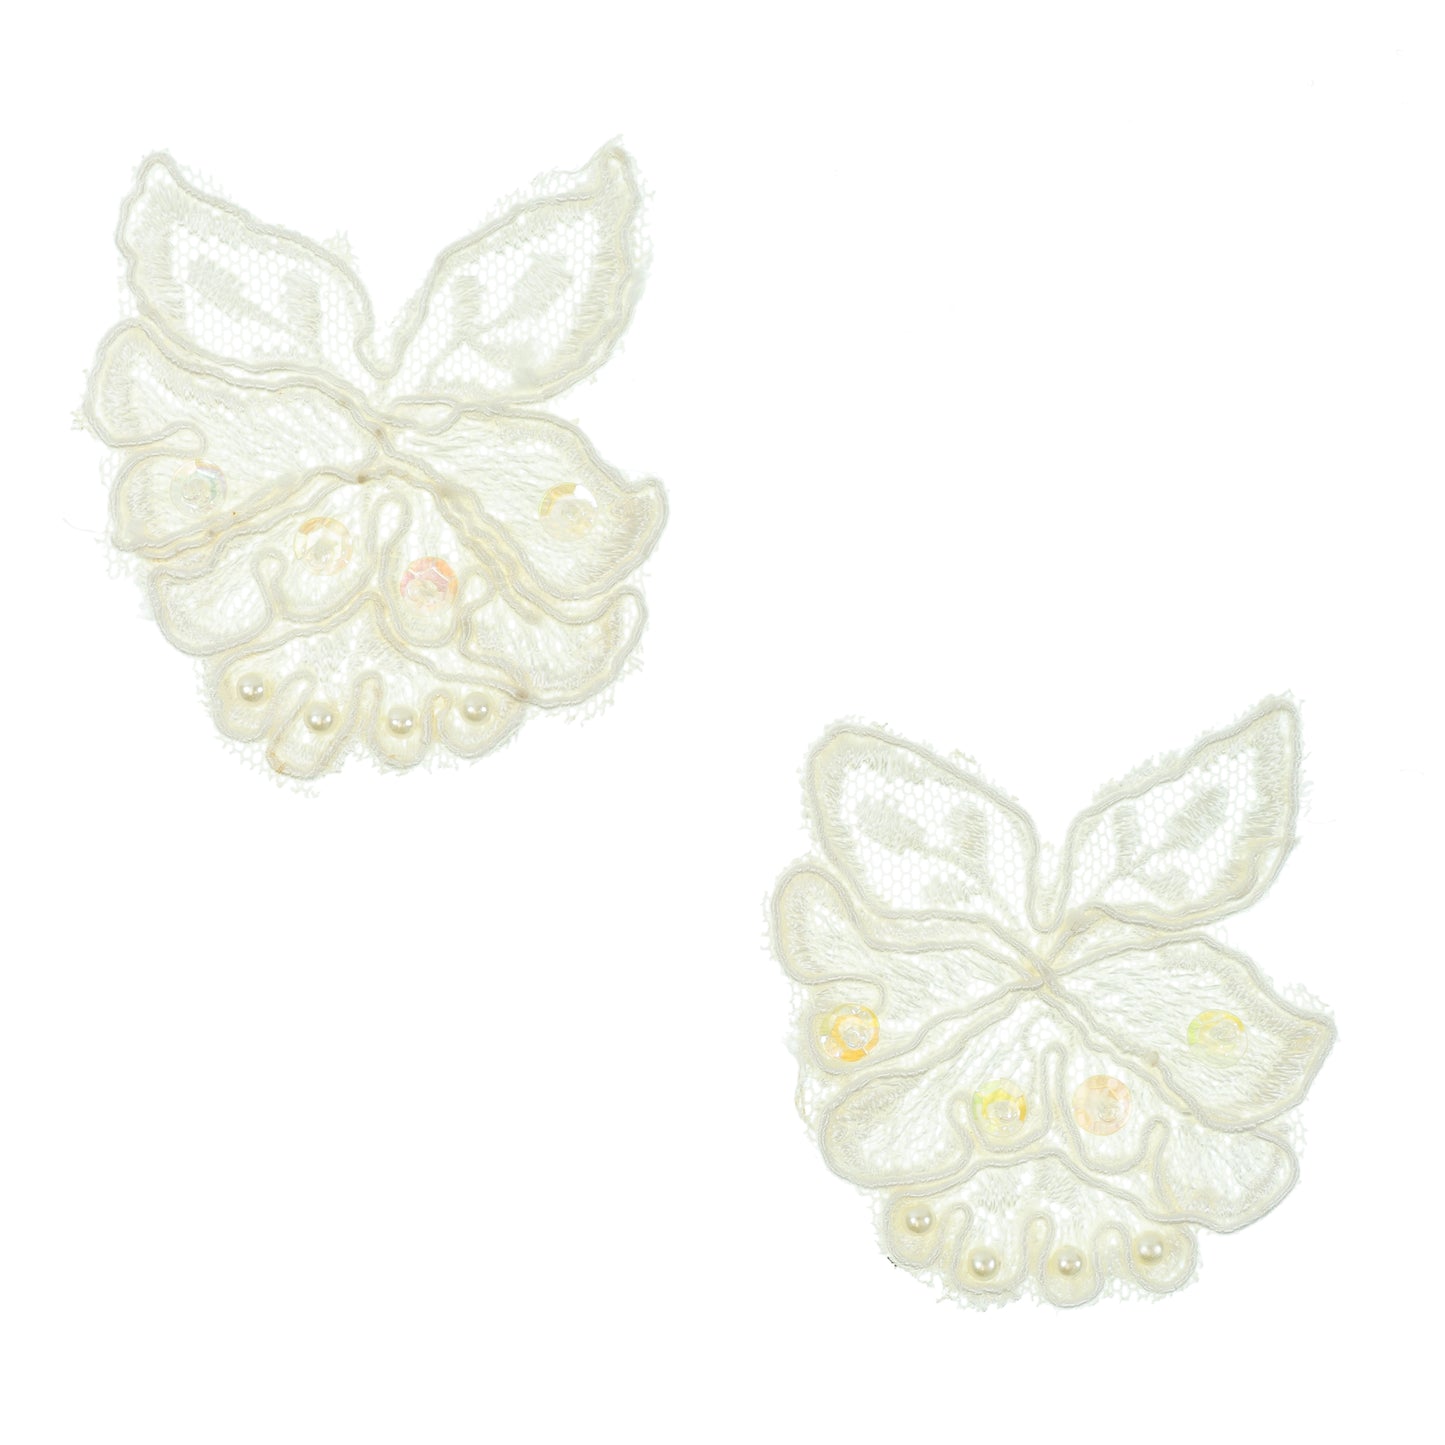 Vintage Corded Lace Applique (Pack of 2)  - Ivory